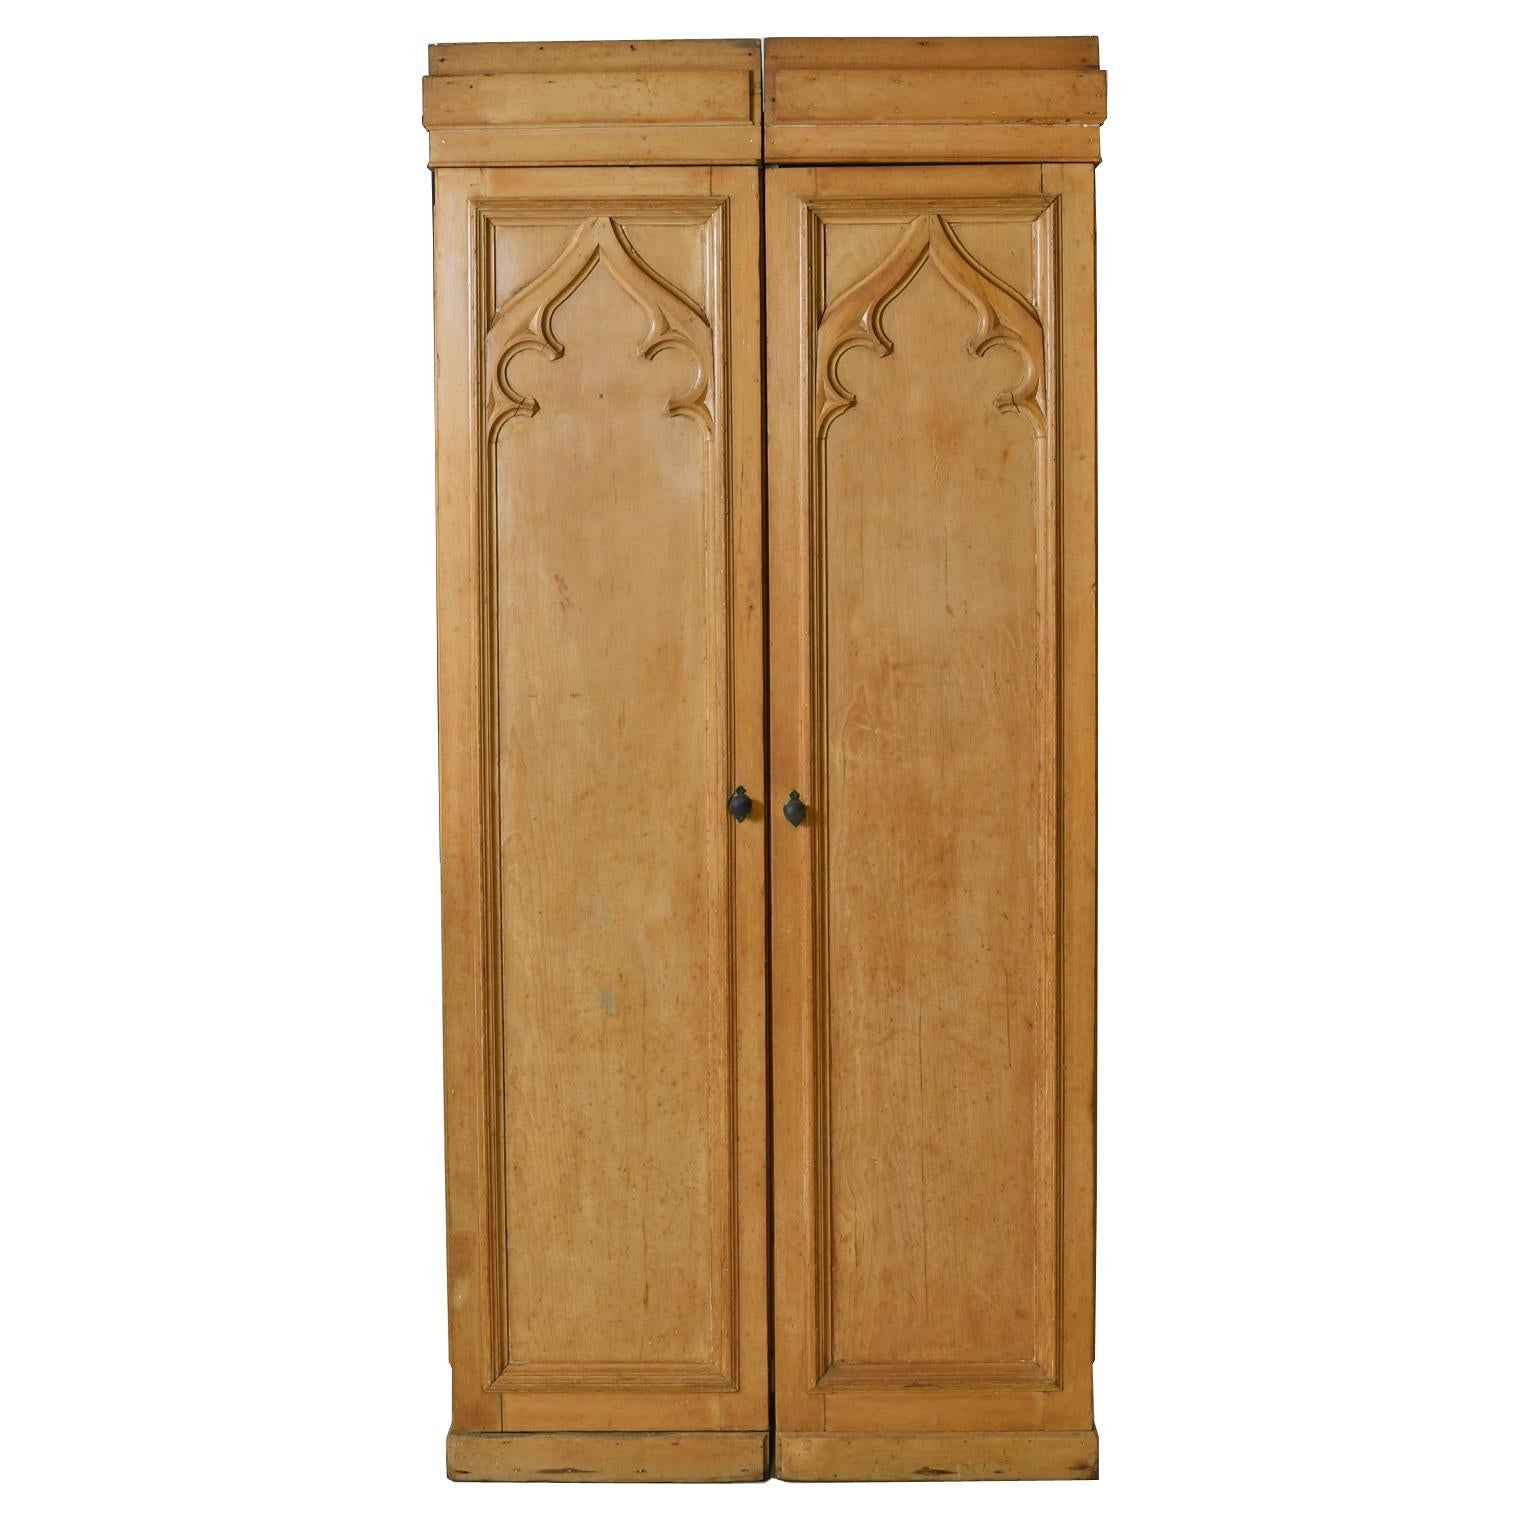 Pair of Antique Narrow & Tall English Gothic-Revival Lockers in Pine